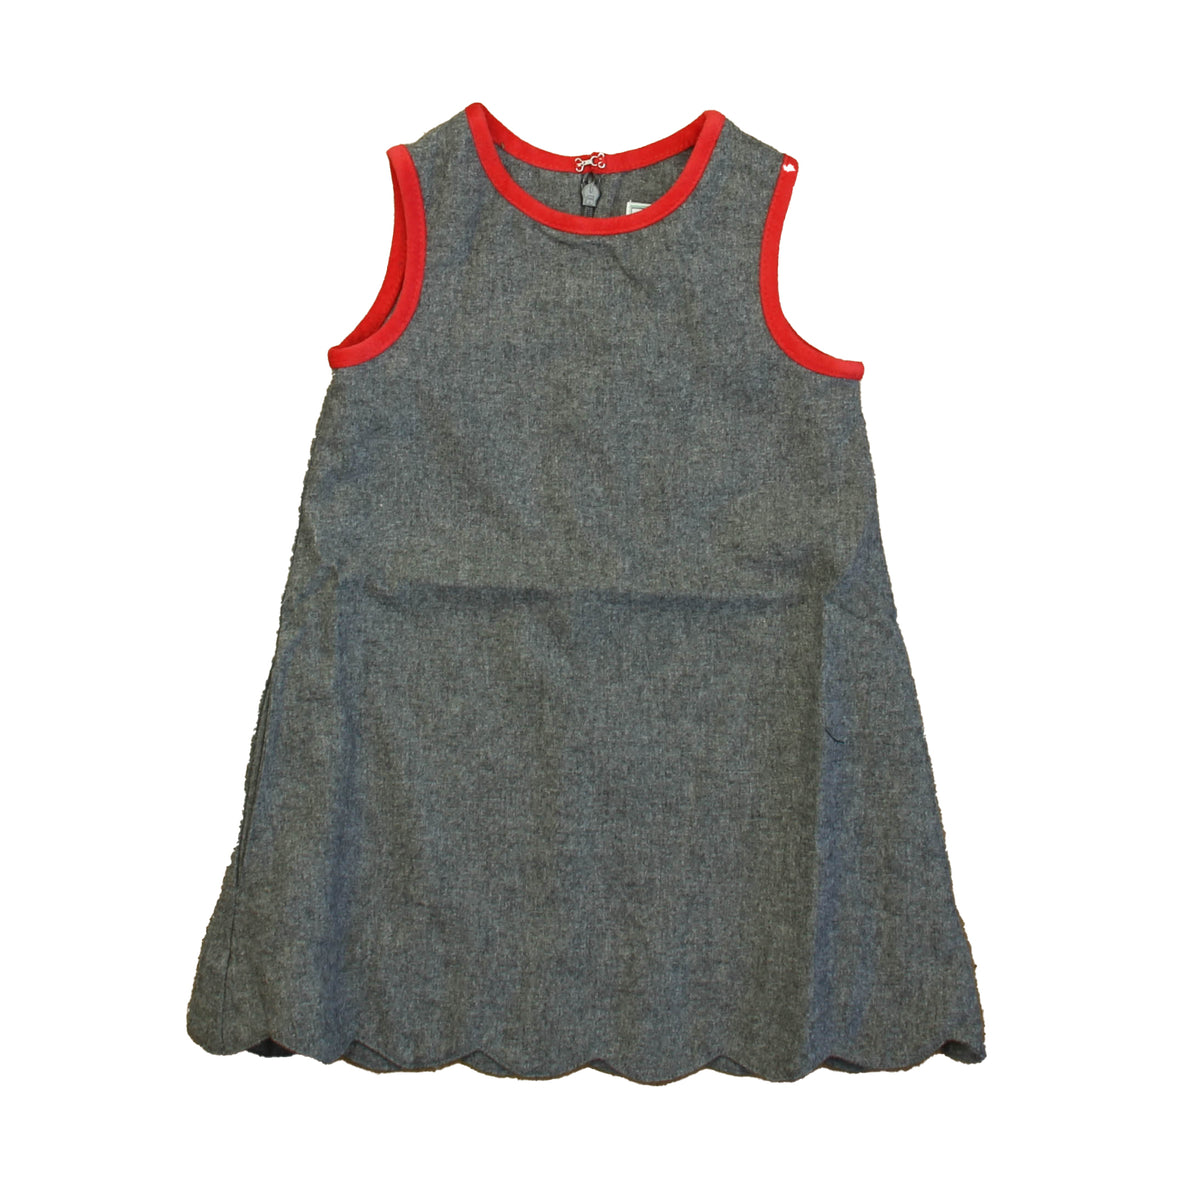 New with Tags: Charcoal Gray w/ Red Velvet Dress size: 2-5T -- FINAL SALE